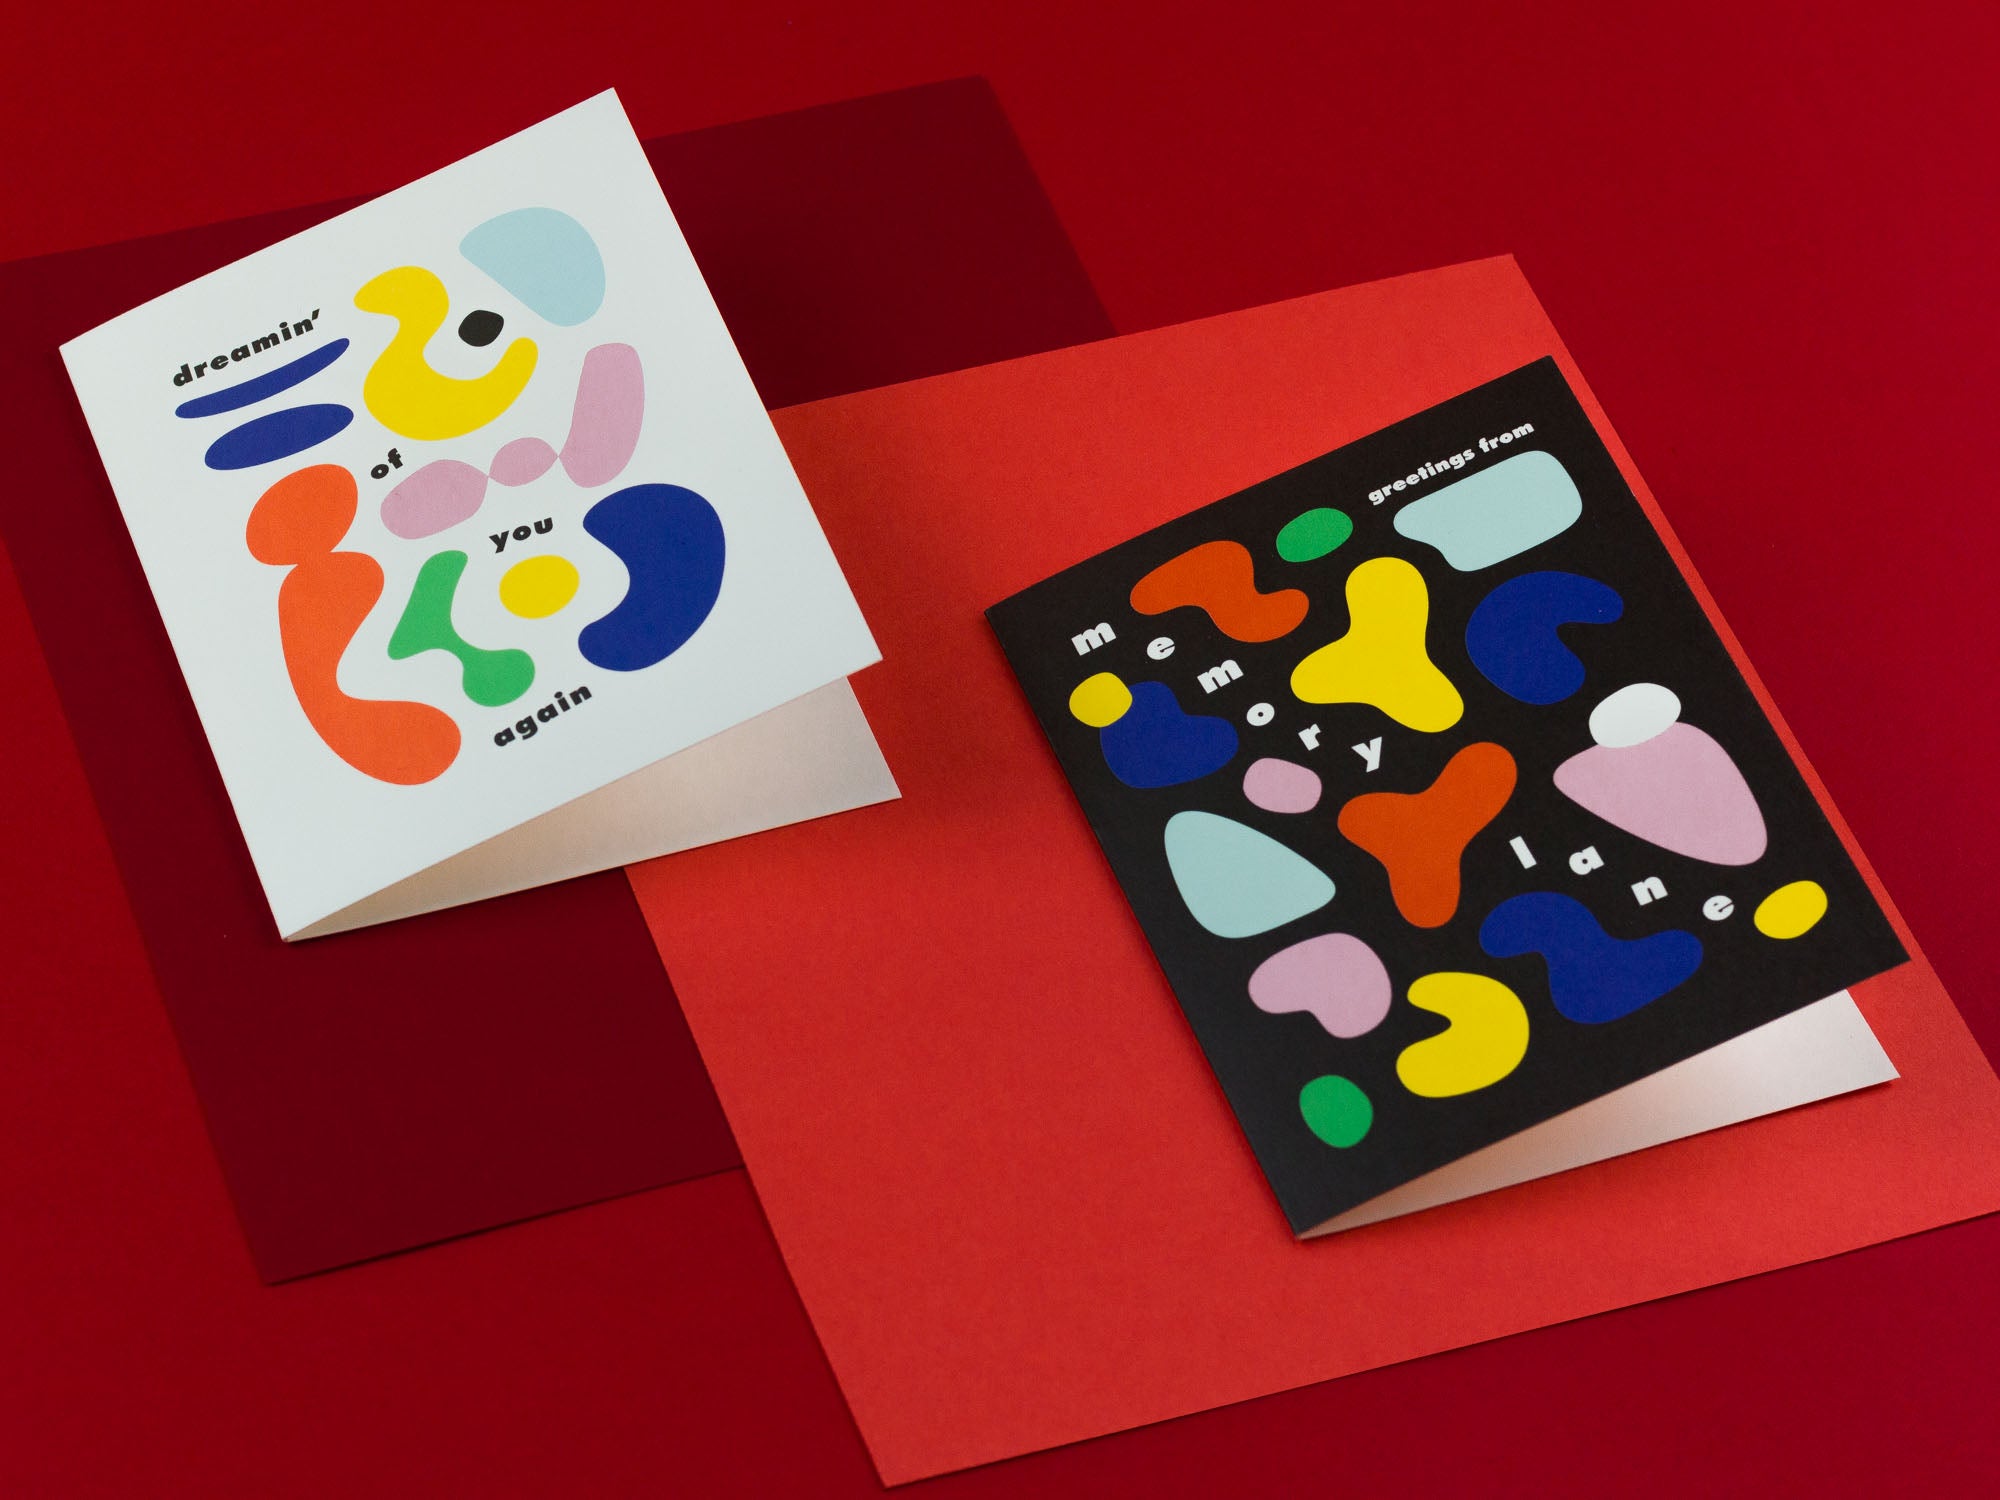 Dreamin' of You love card and Greetings From Memory Lane thinking of you card with colorful abstract shapes by @mydarlin_bk